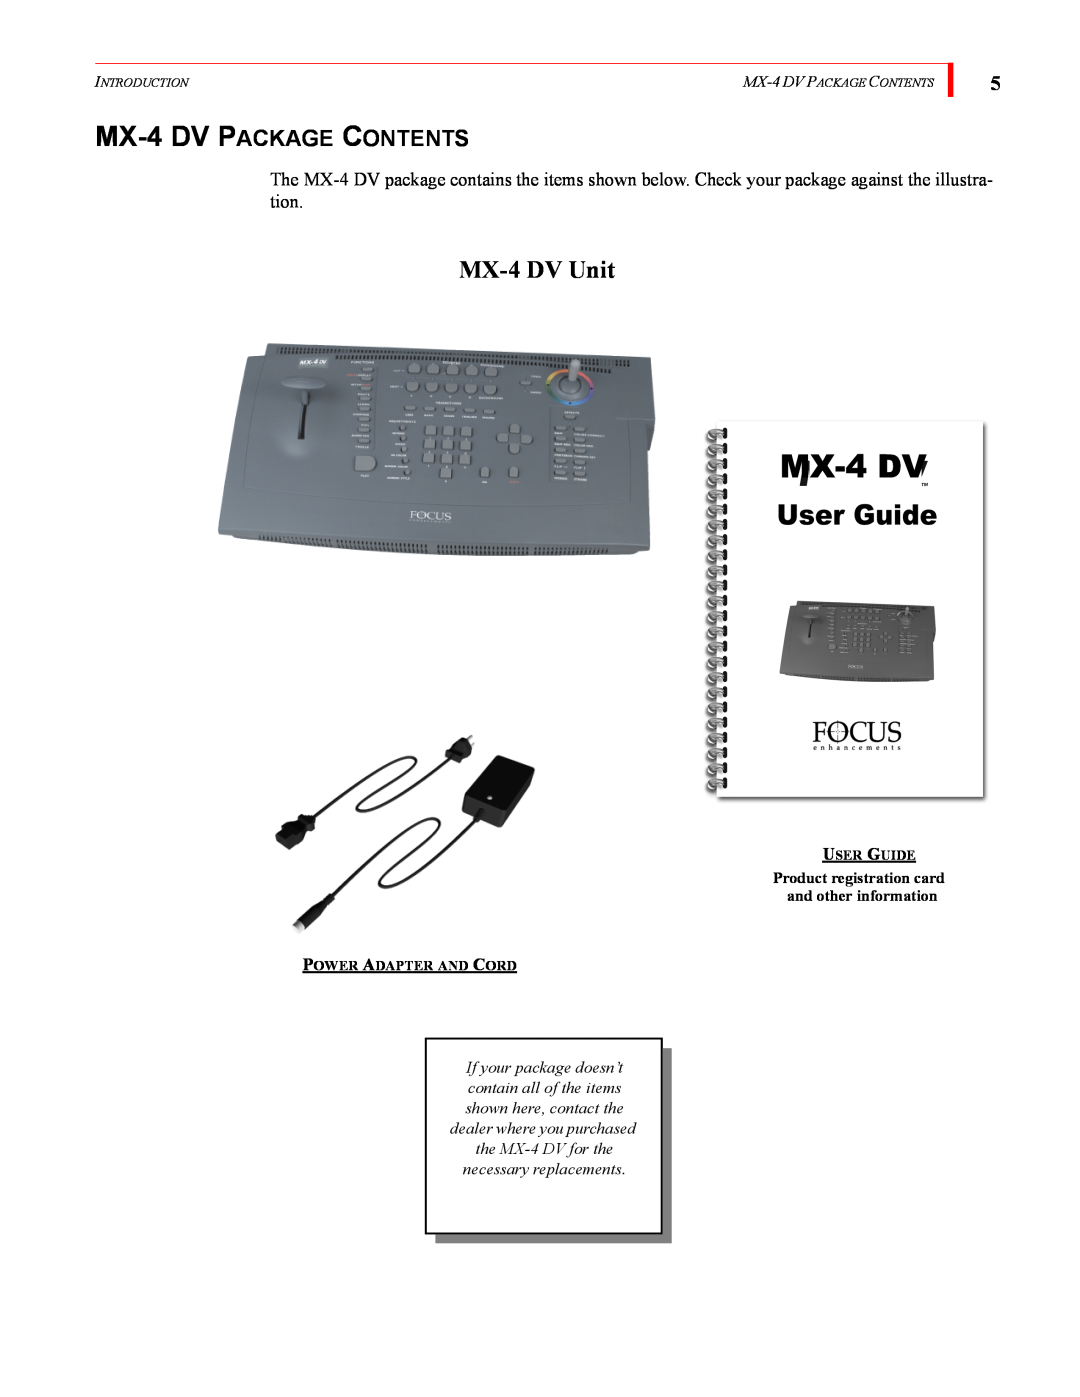 FOCUS Enhancements MX-4DV MX-4 DV PACKAGE CONTENTS, MX-4 DV Unit, User Guide, Power Adapter And Cord, Introduction 